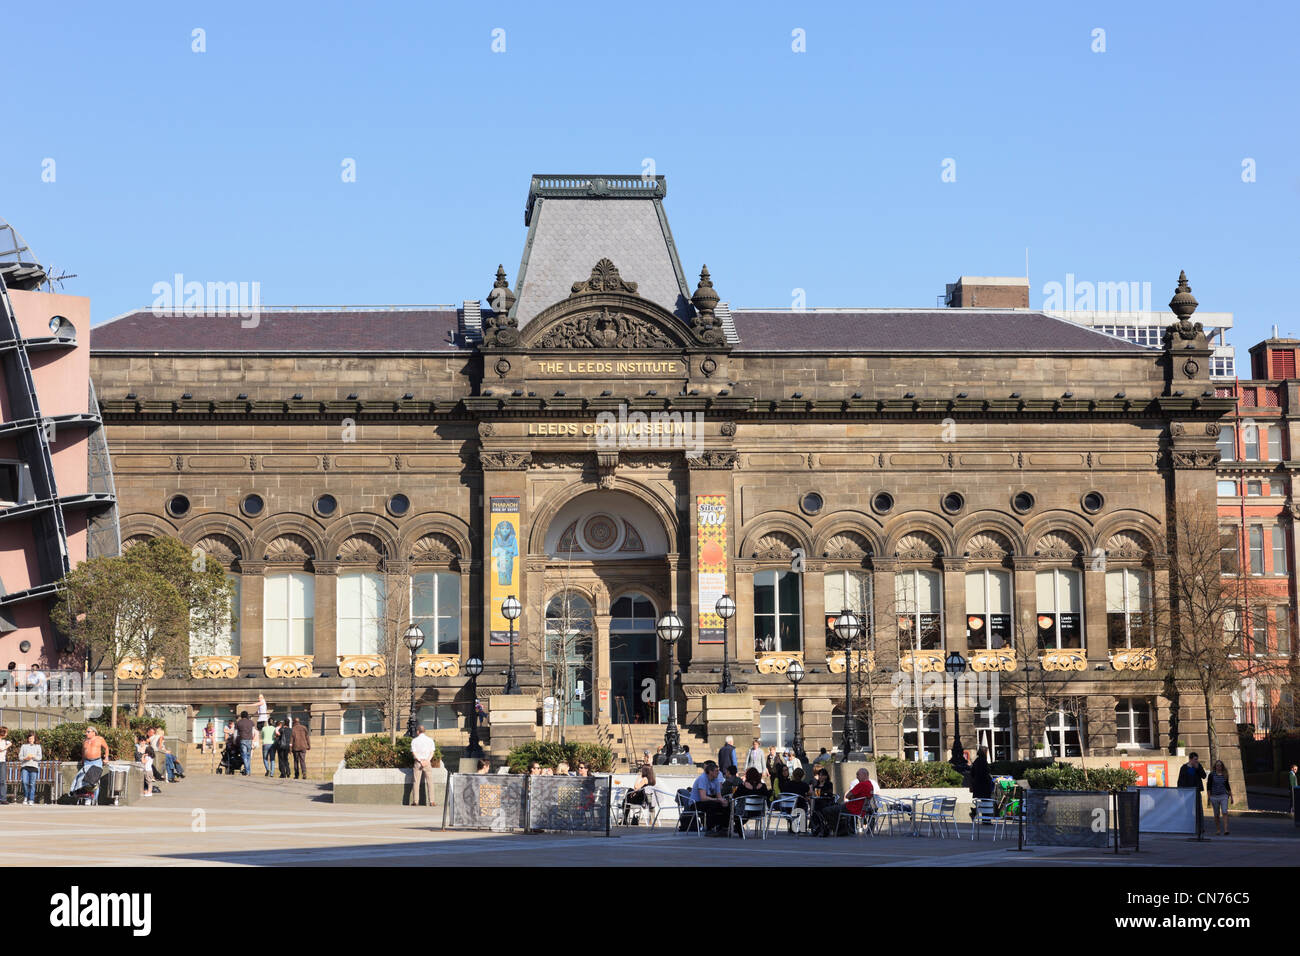 Leeds City Museum in historic Civic Institute building 1862 with people outside. Millennium Square Leeds Yorkshire England UK Stock Photo